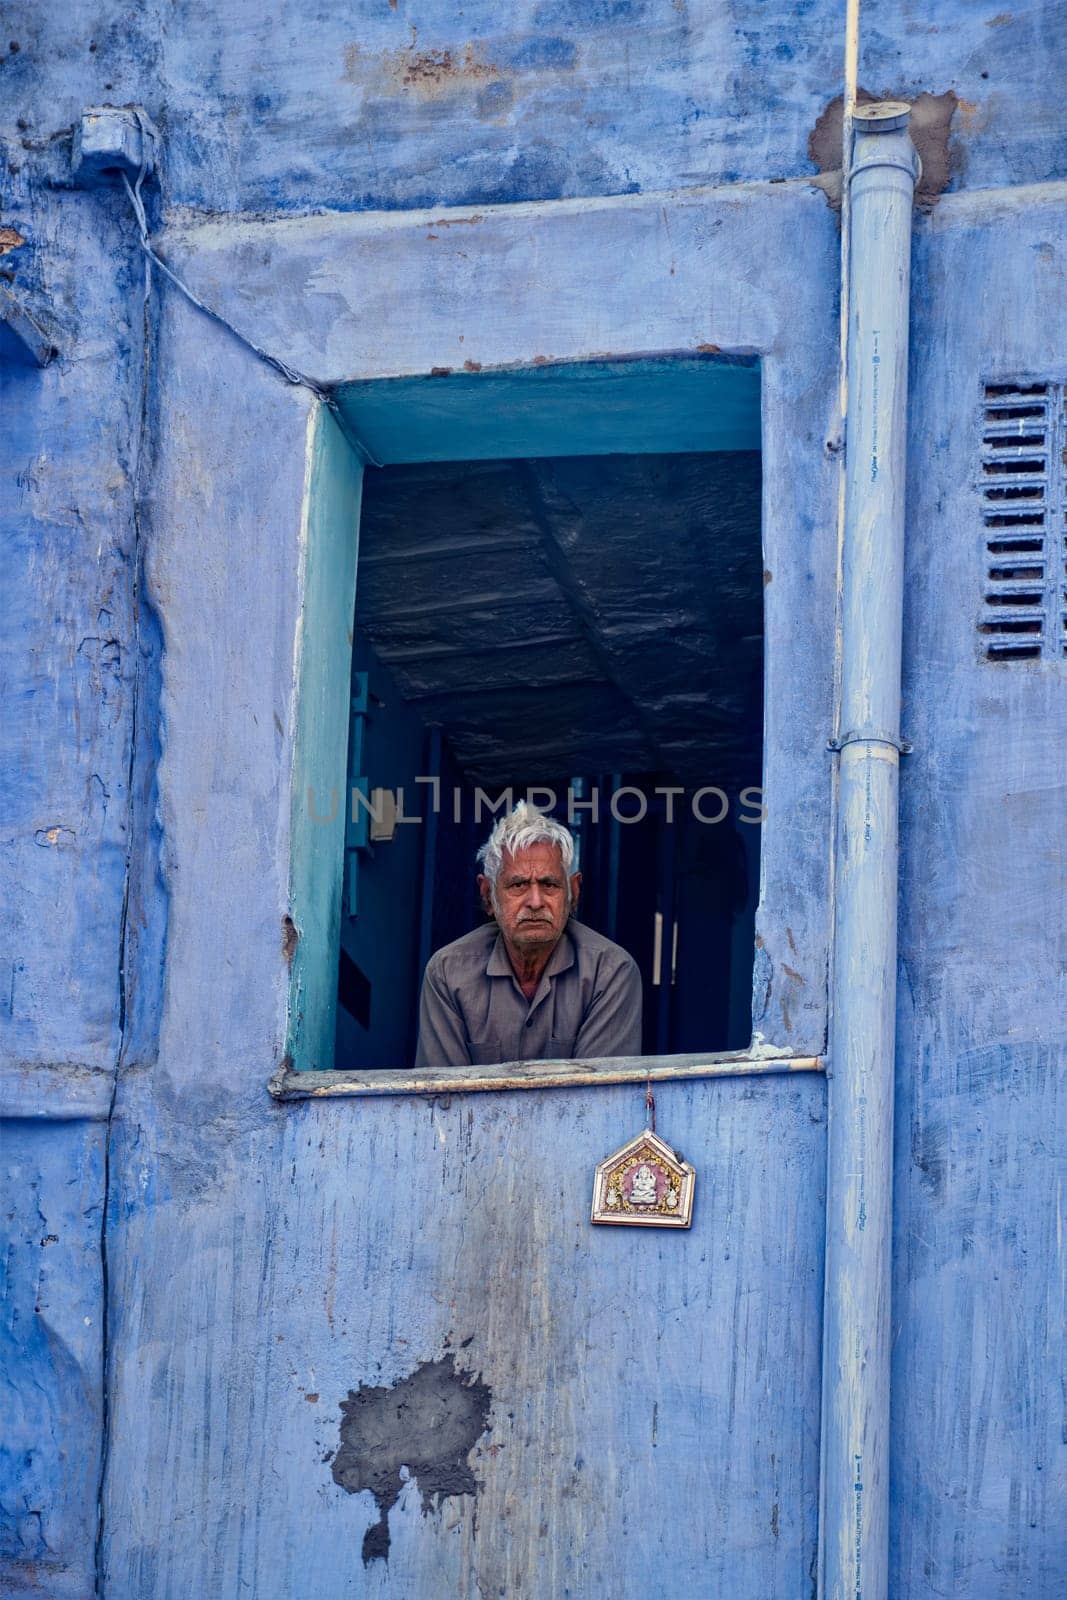 Jodhpur, India - November 13, 2019: Unidentified indian man in window of blue house in Jodhpur, also known as Blue City due to the vivid blue-painted Brahmin houses. Jodhpur, Rajasthan, India